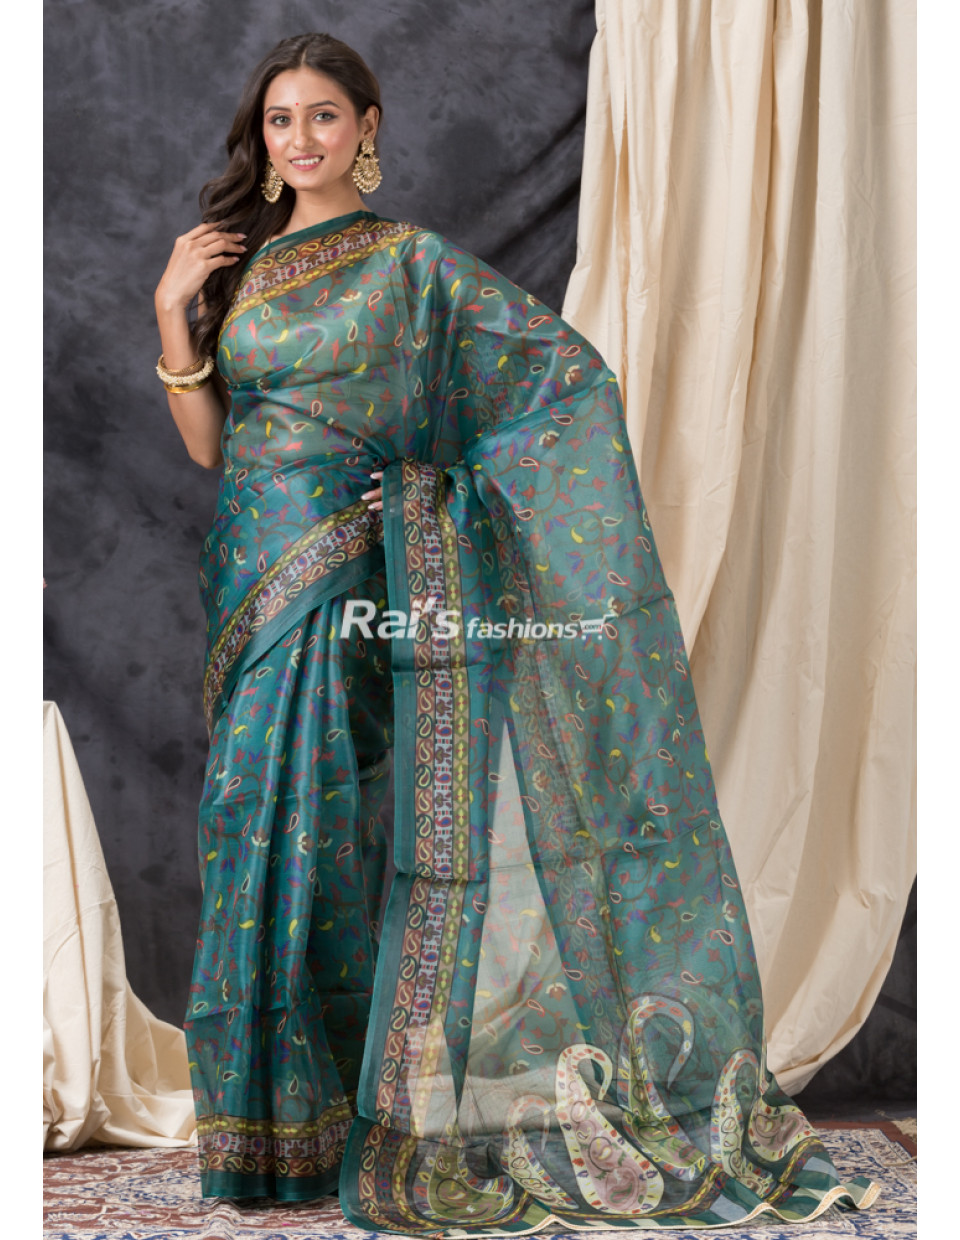 All Over Floral Printed Organza Silk Saree With Golden Lace Border (KR1408)